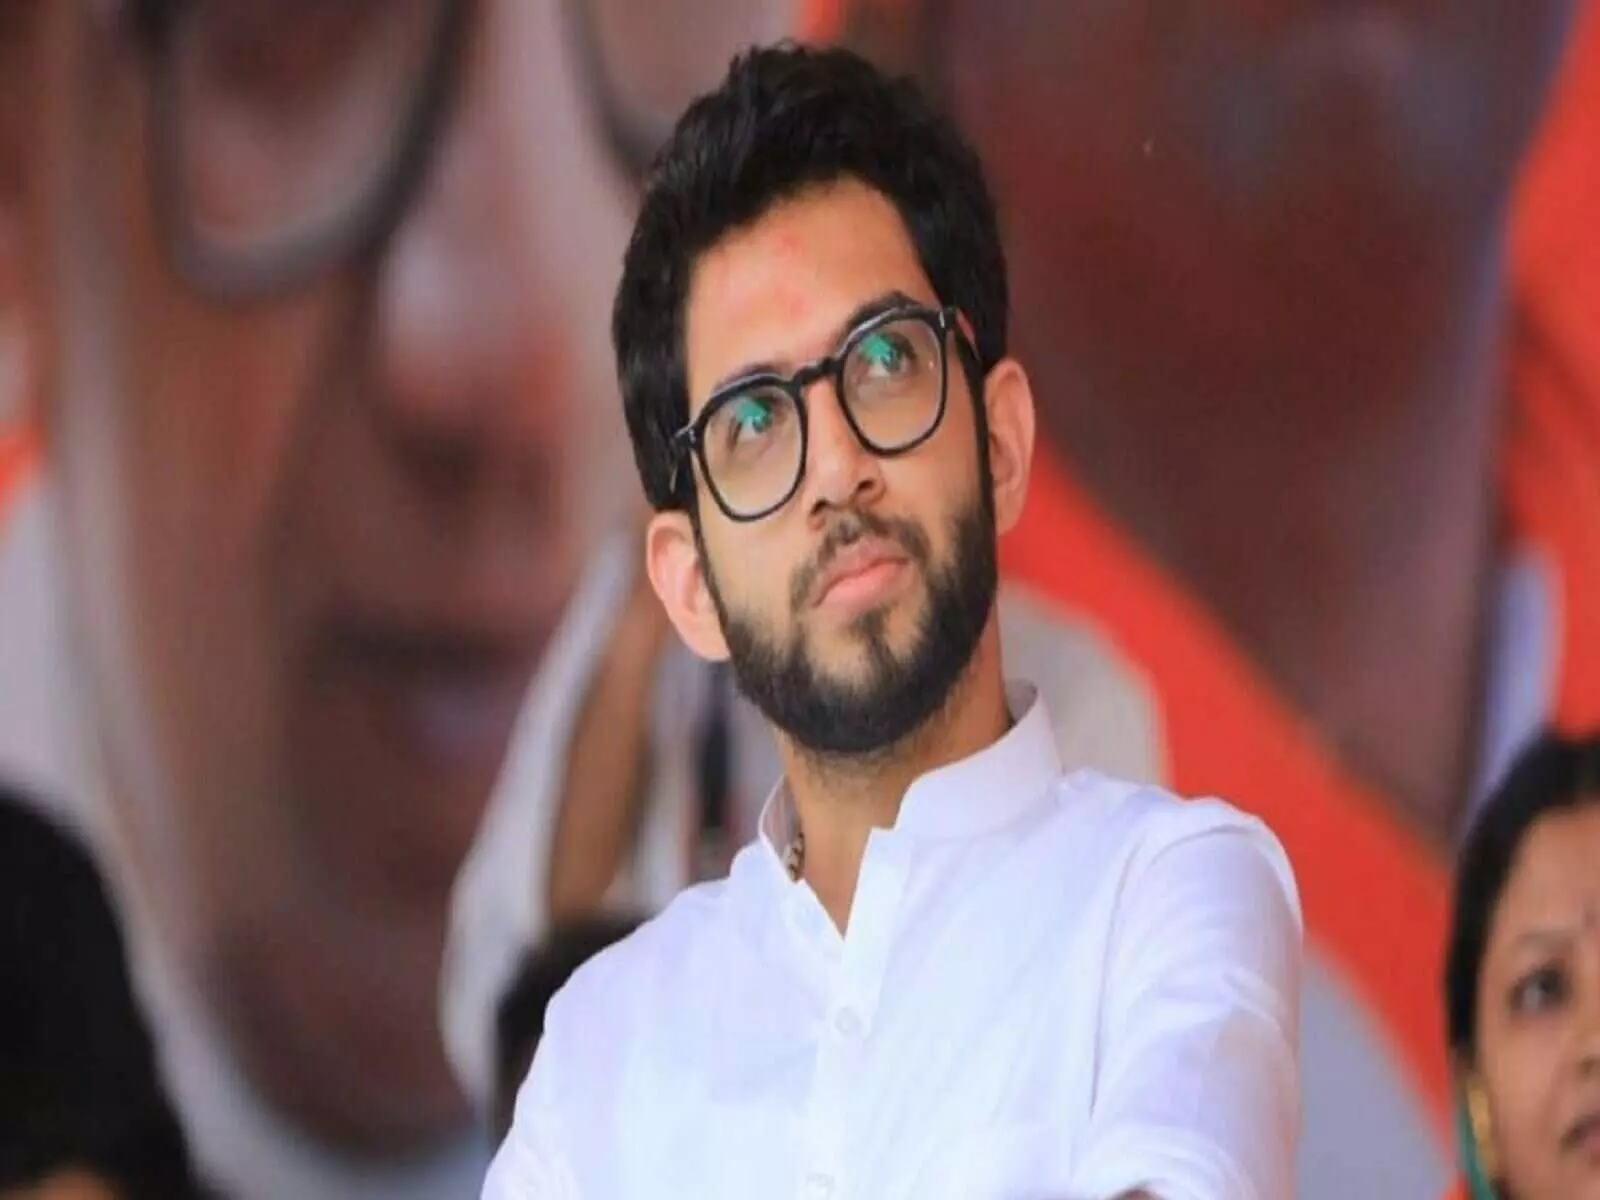 Use loudspeakers to talk about rising inflation, says Aditya Thackeray to MNS chief